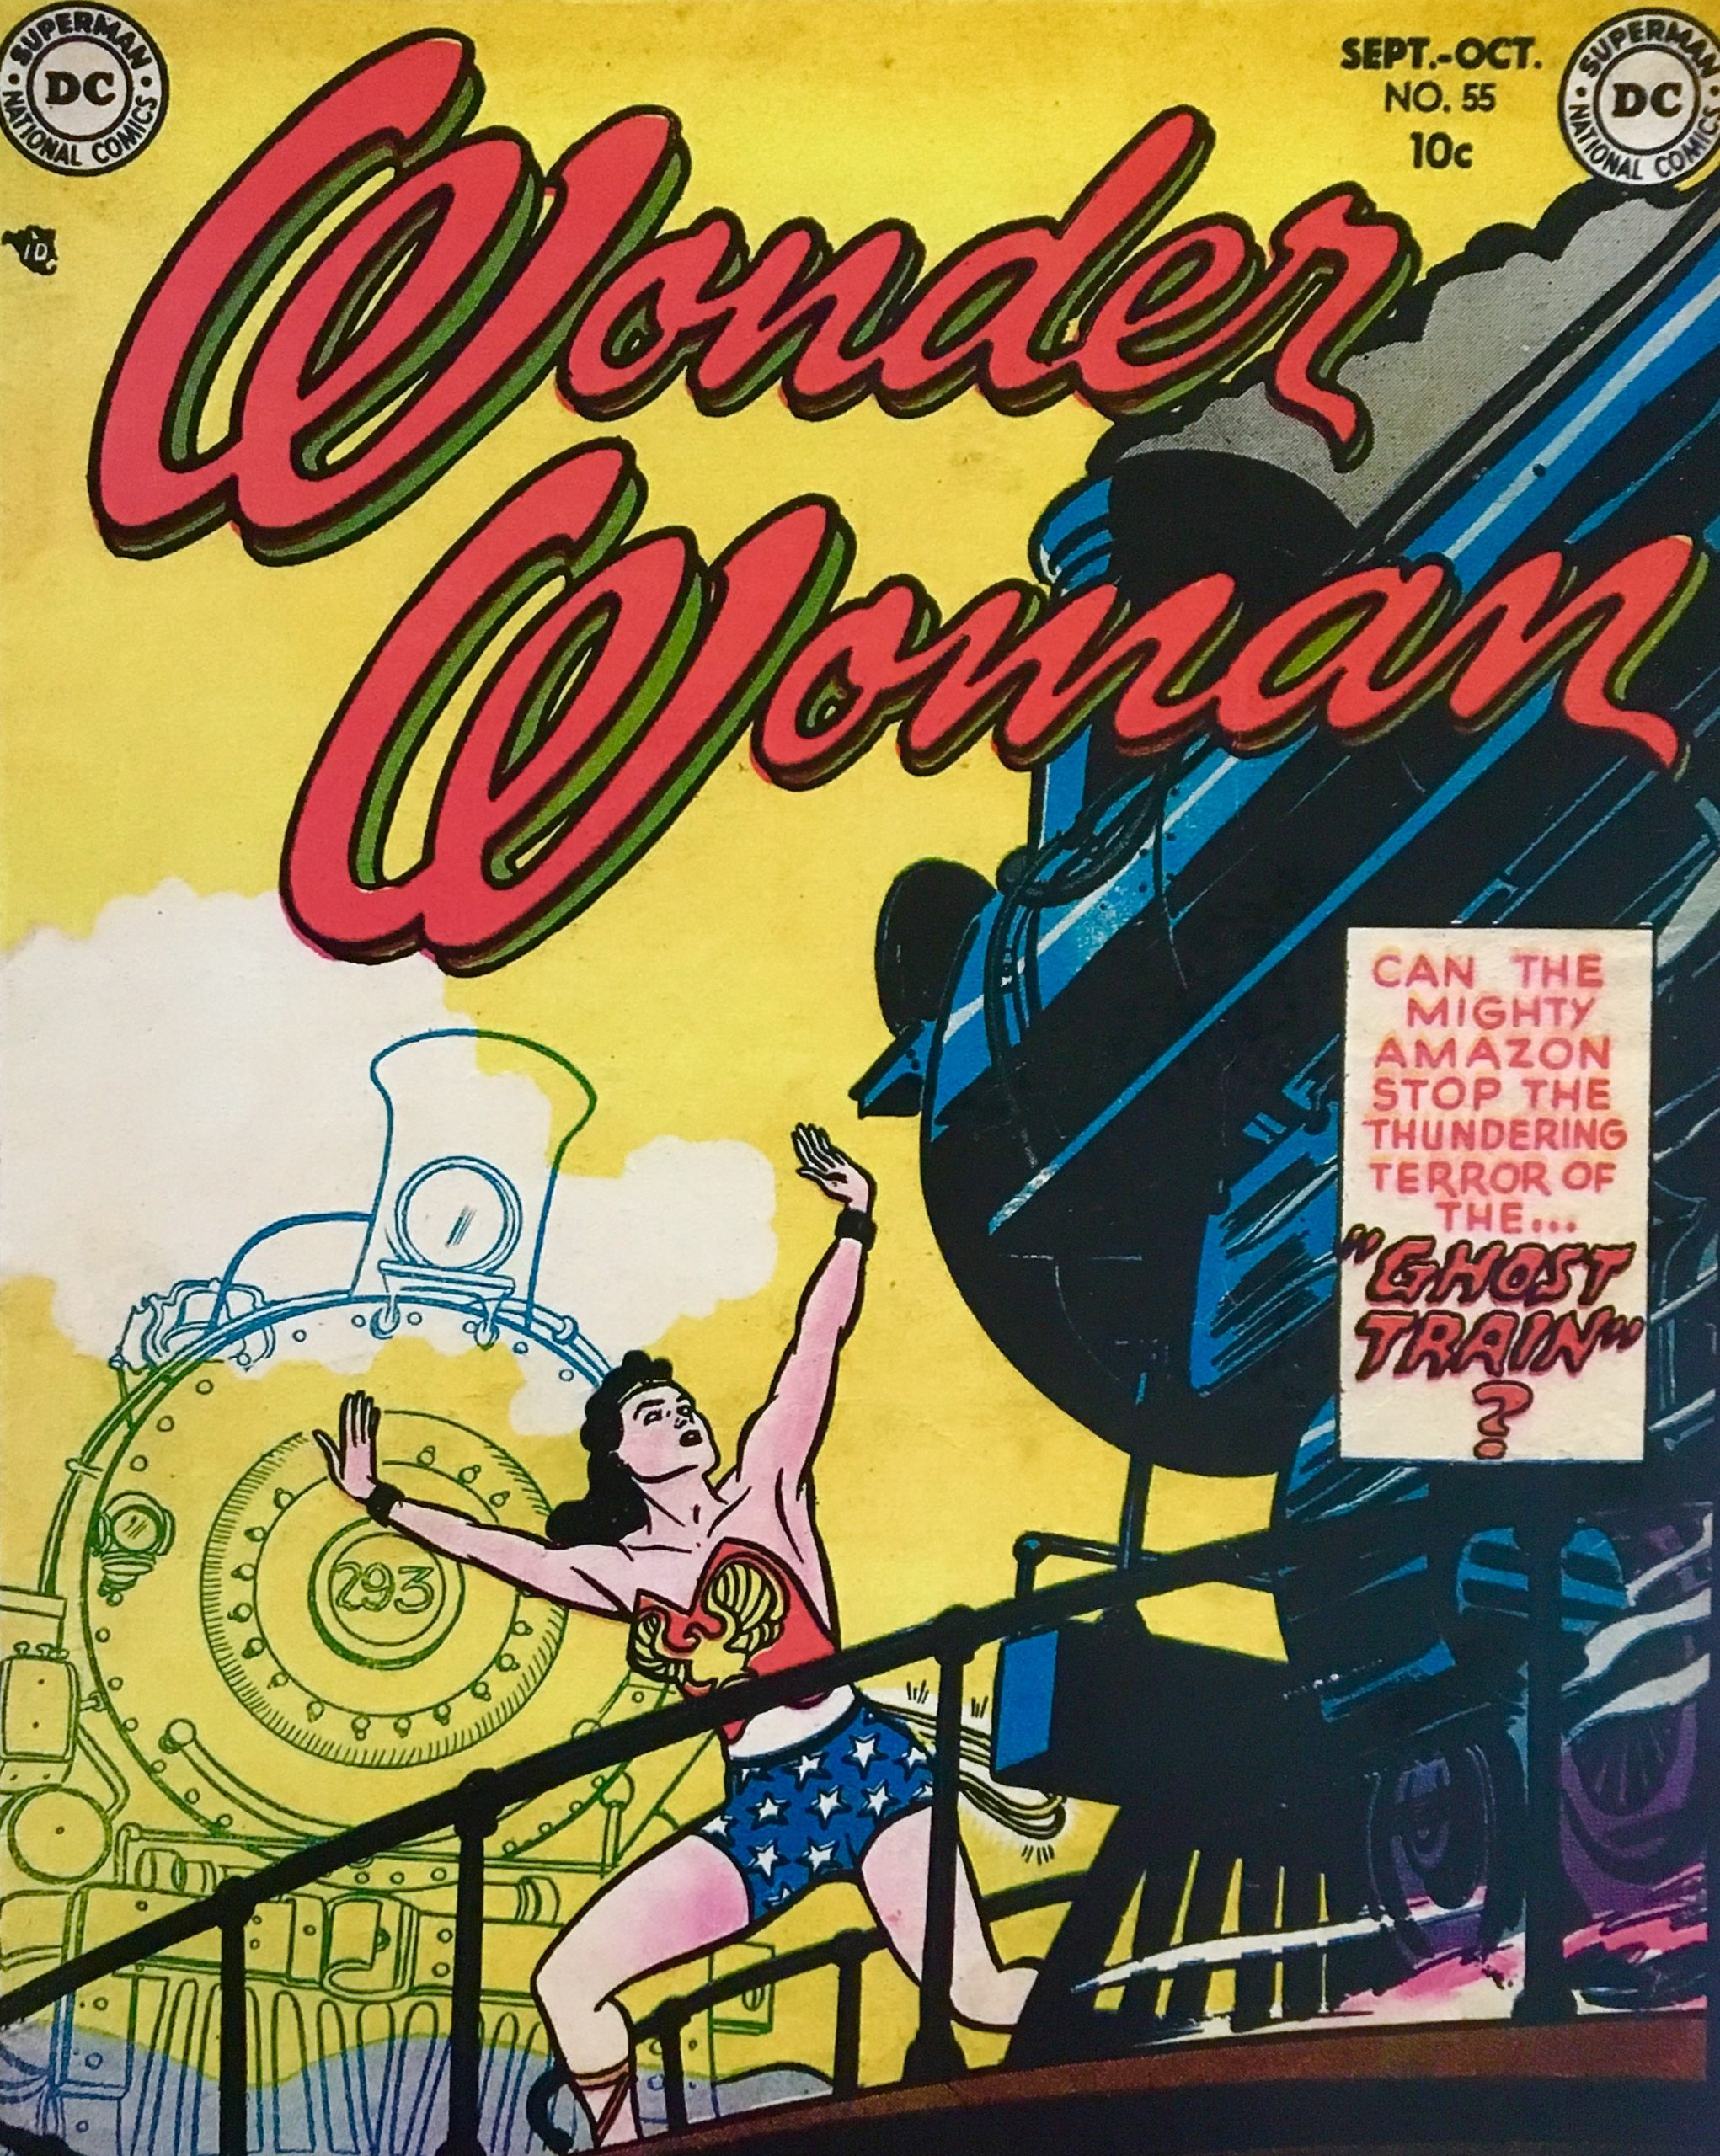 Can Wonder Woman Stop the Terrifying GHOST TRAIN?!!